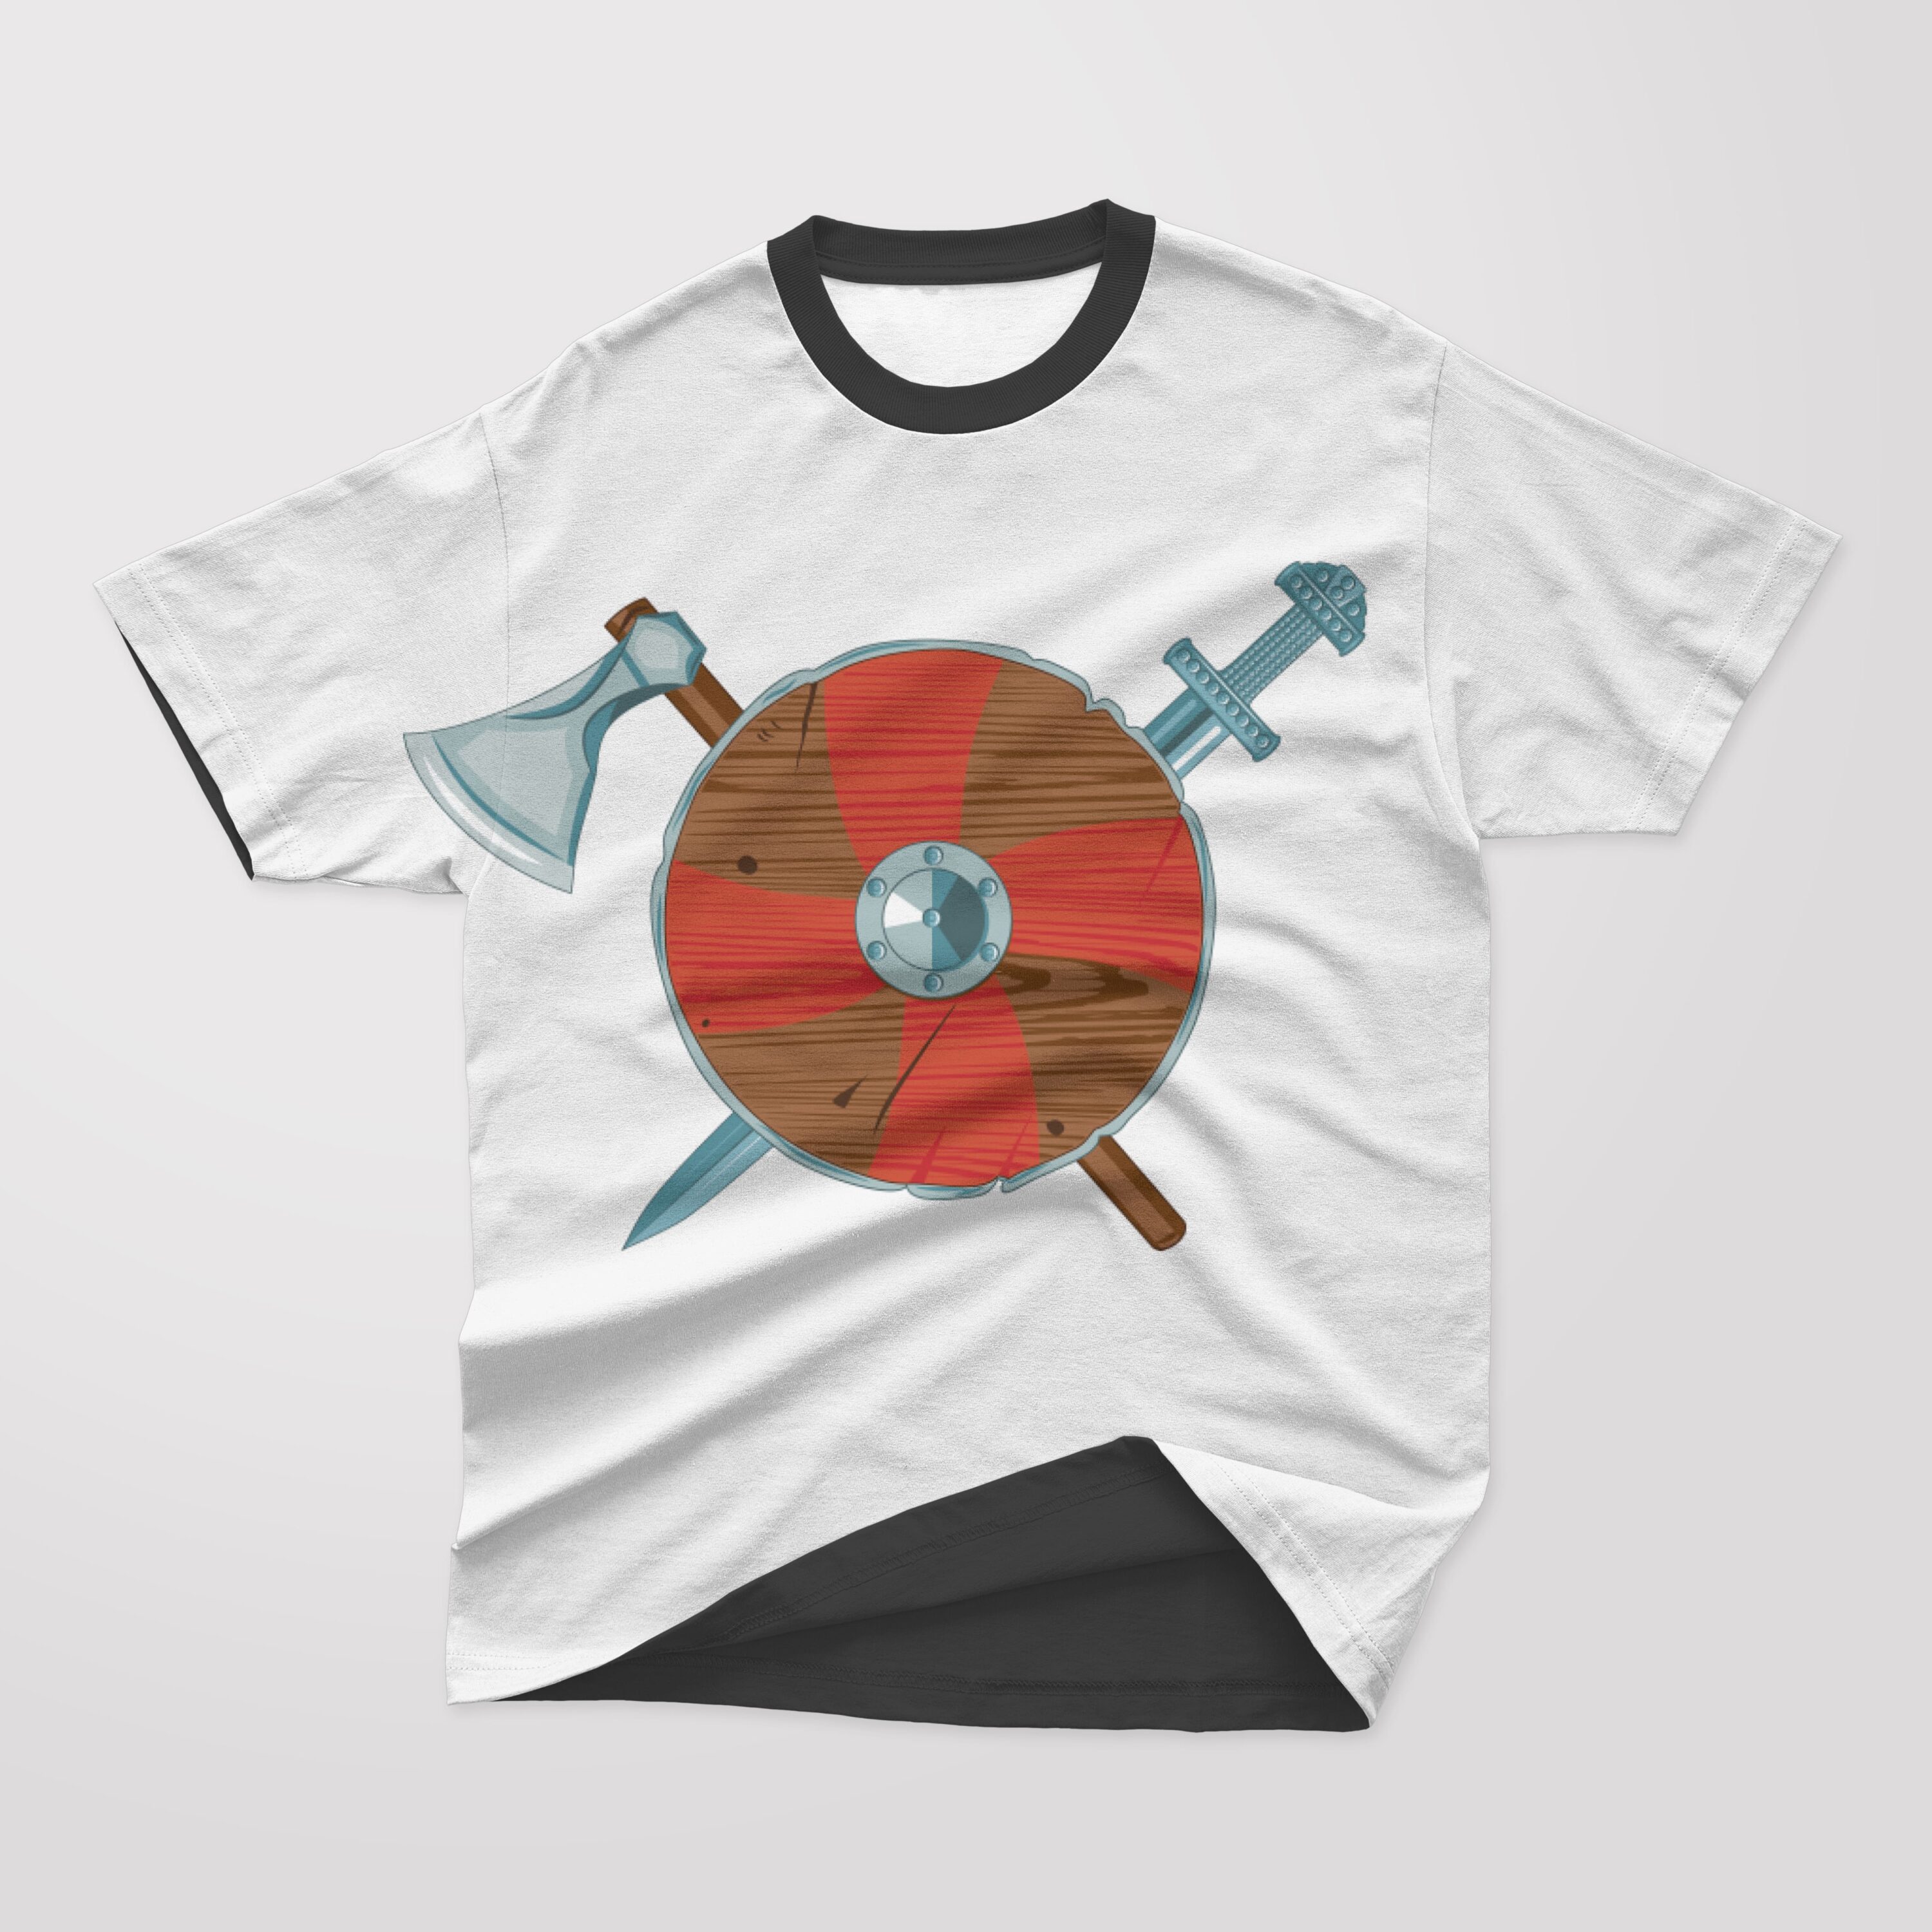 Red wooden wheel with sword on the white t-shirt.